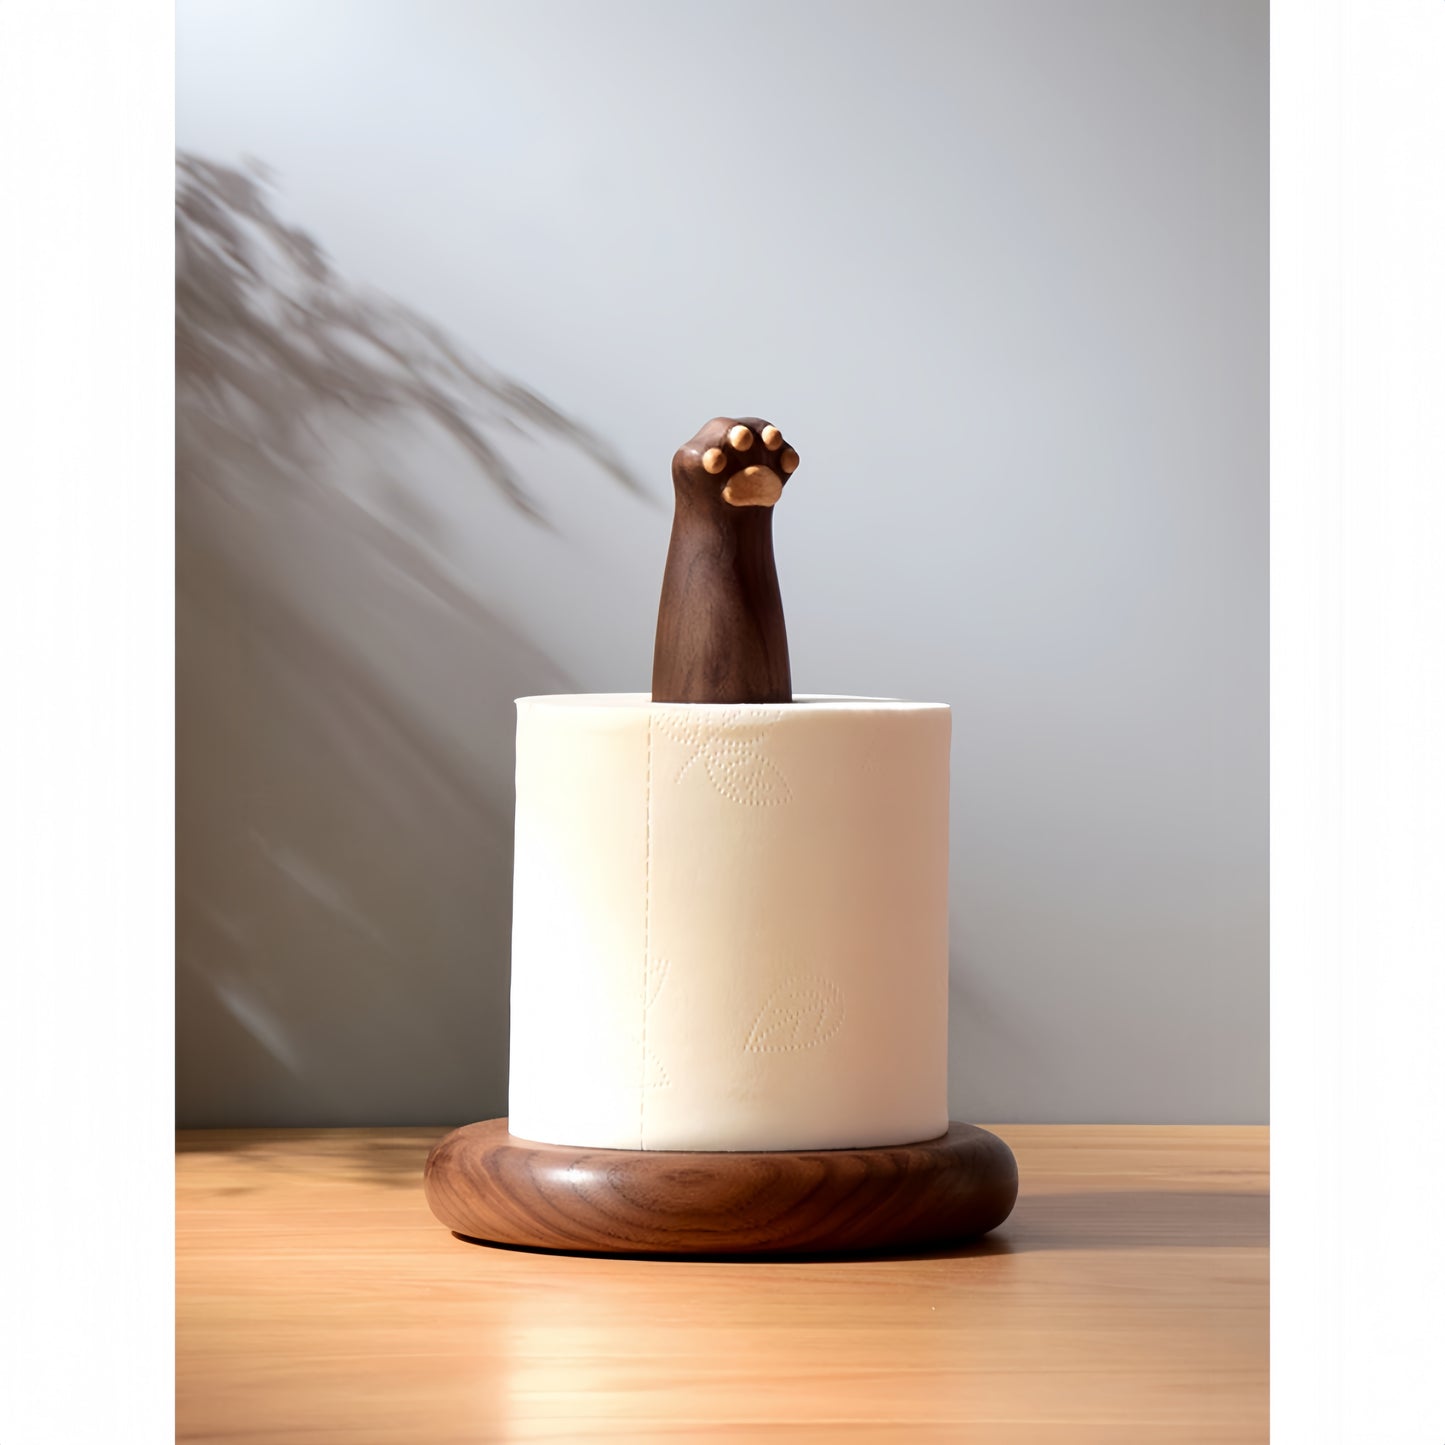 Hand-Carved Wooden Cat Claw Tissue Holder